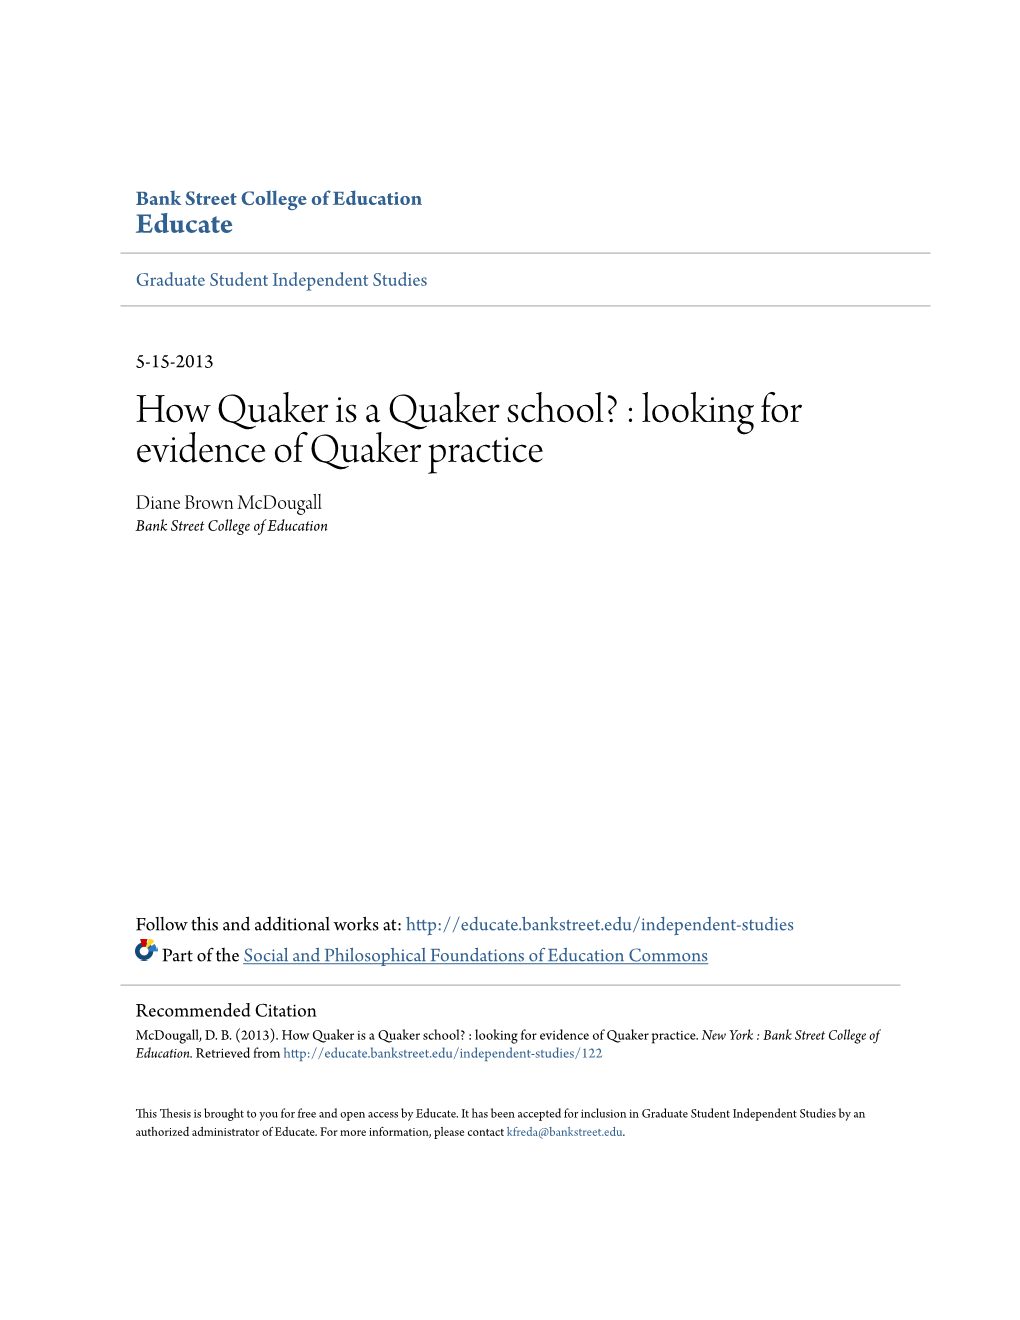 Looking for Evidence of Quaker Practice Diane Brown Mcdougall Bank Street College of Education